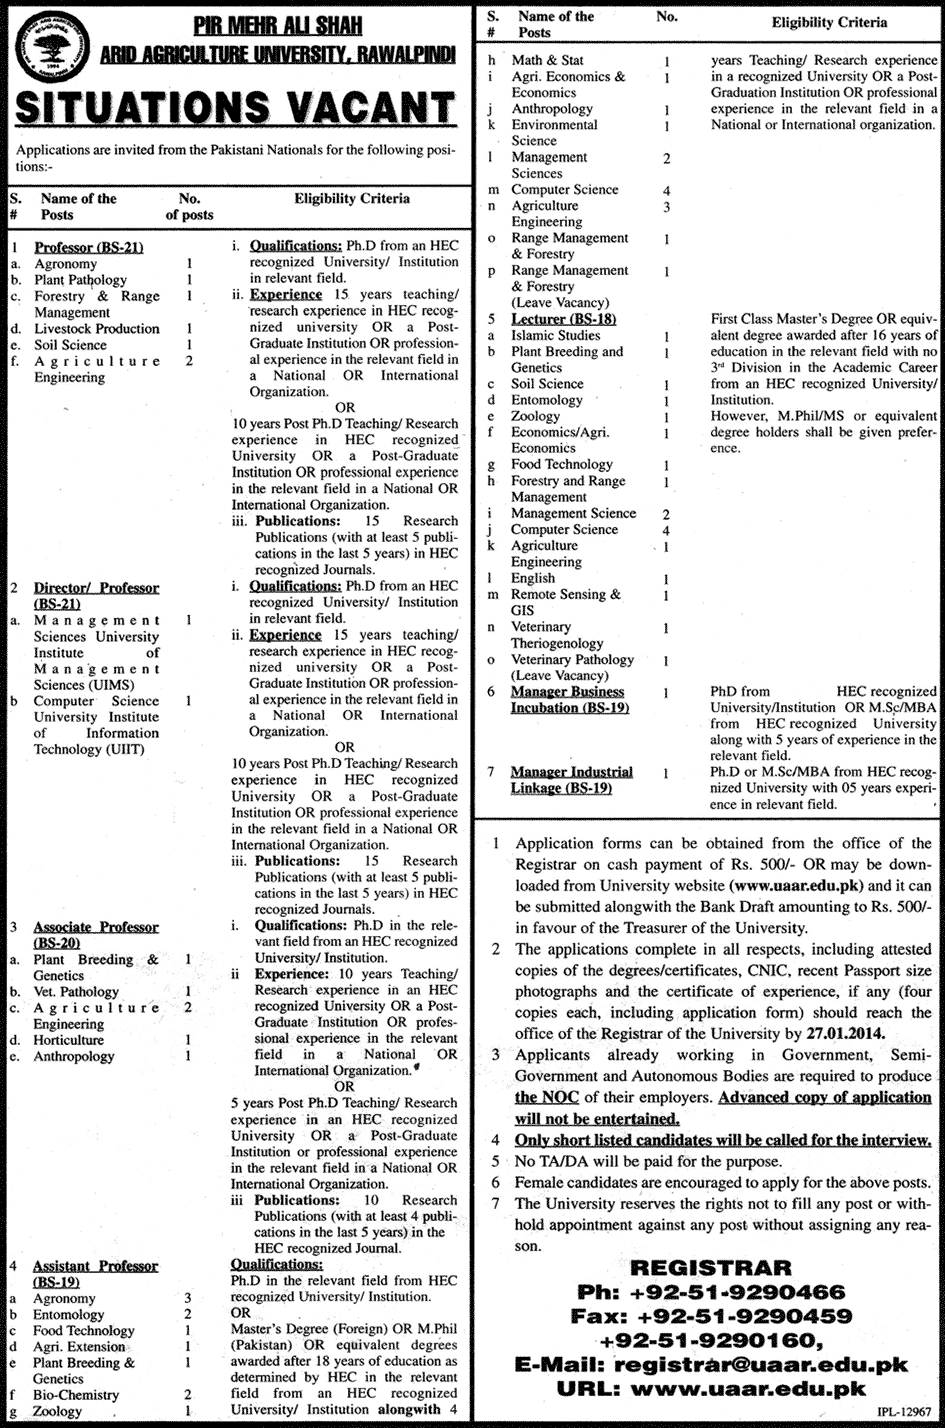 Arid Agriculture University Rawalpindi Jobs 2014 for Teaching Faculty / Professors / Lecturers & Administrative Staff